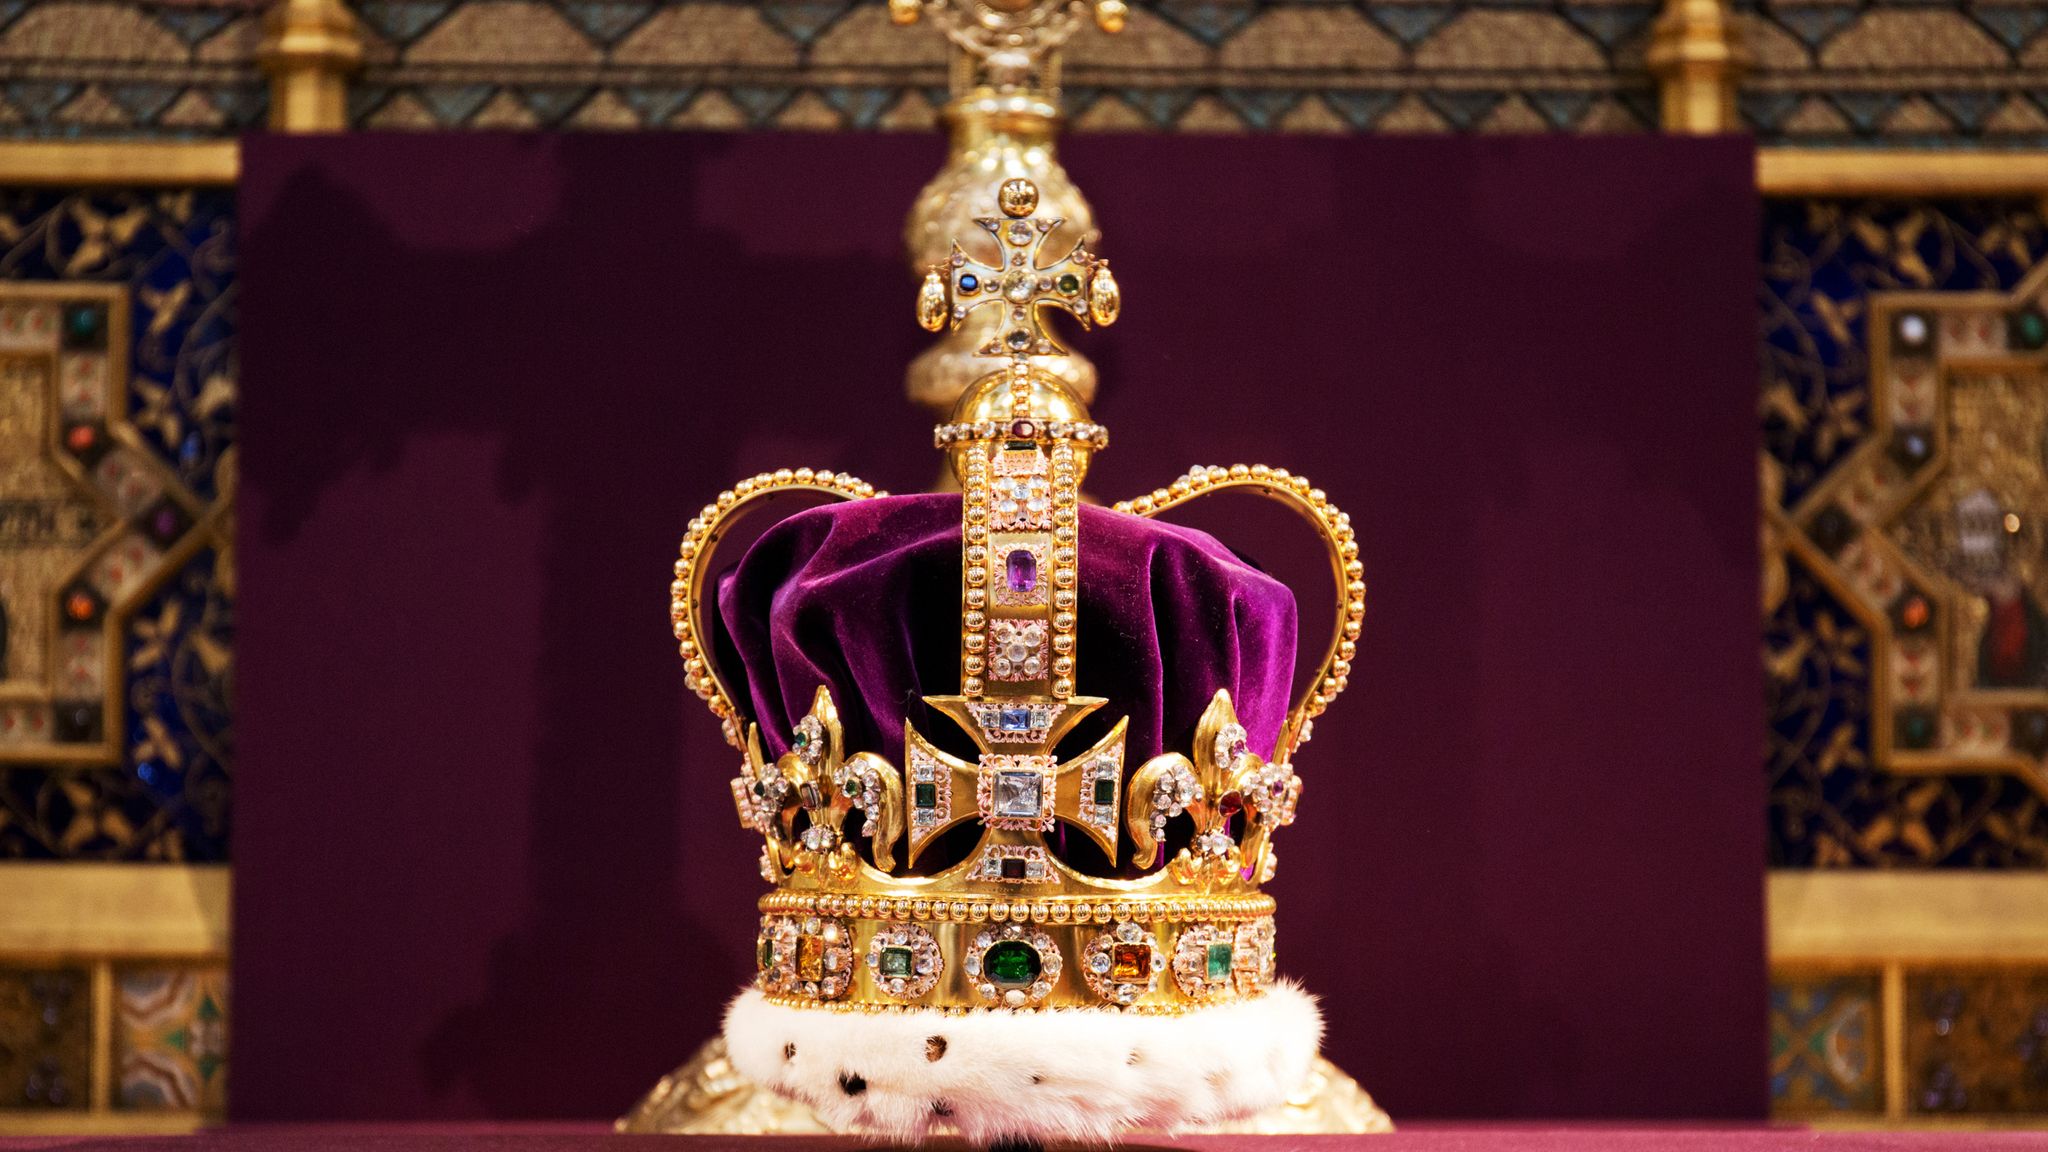 The st edward crown used in the coronation